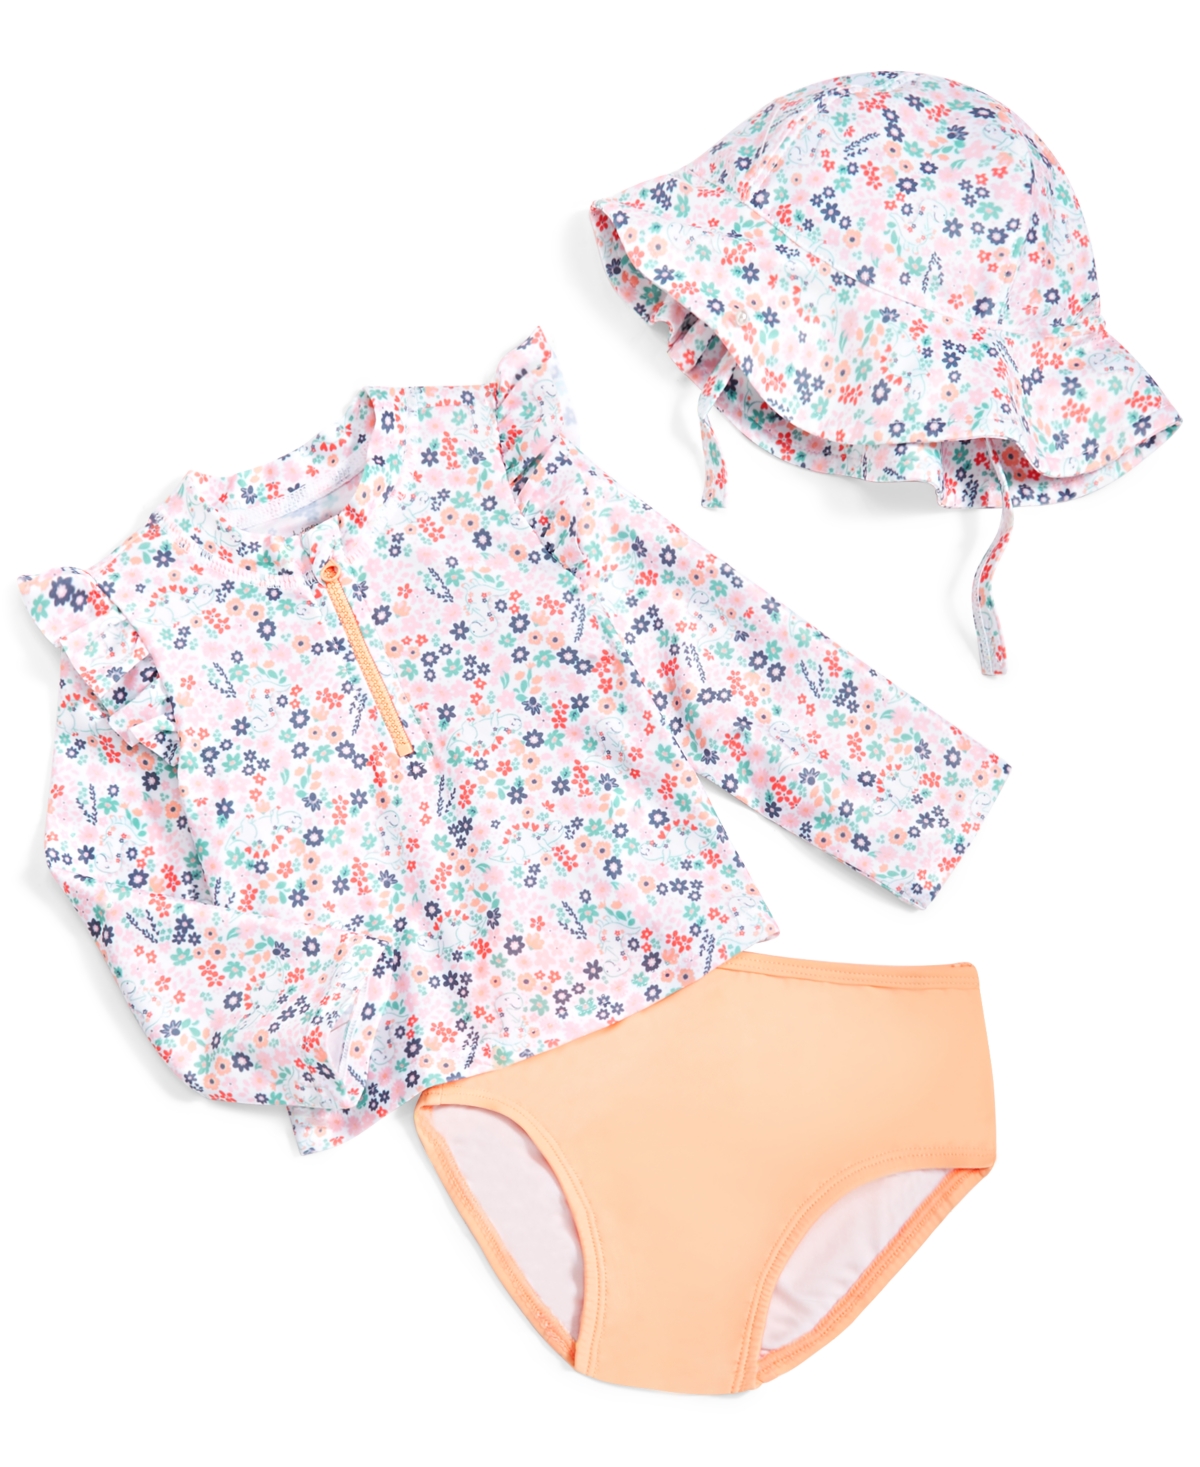 First Impressions Baby Girls Dinosaur Floral Swim Shirt, Bottoms And Hat, 3 Piece Set, Created For Macy's In Bright White